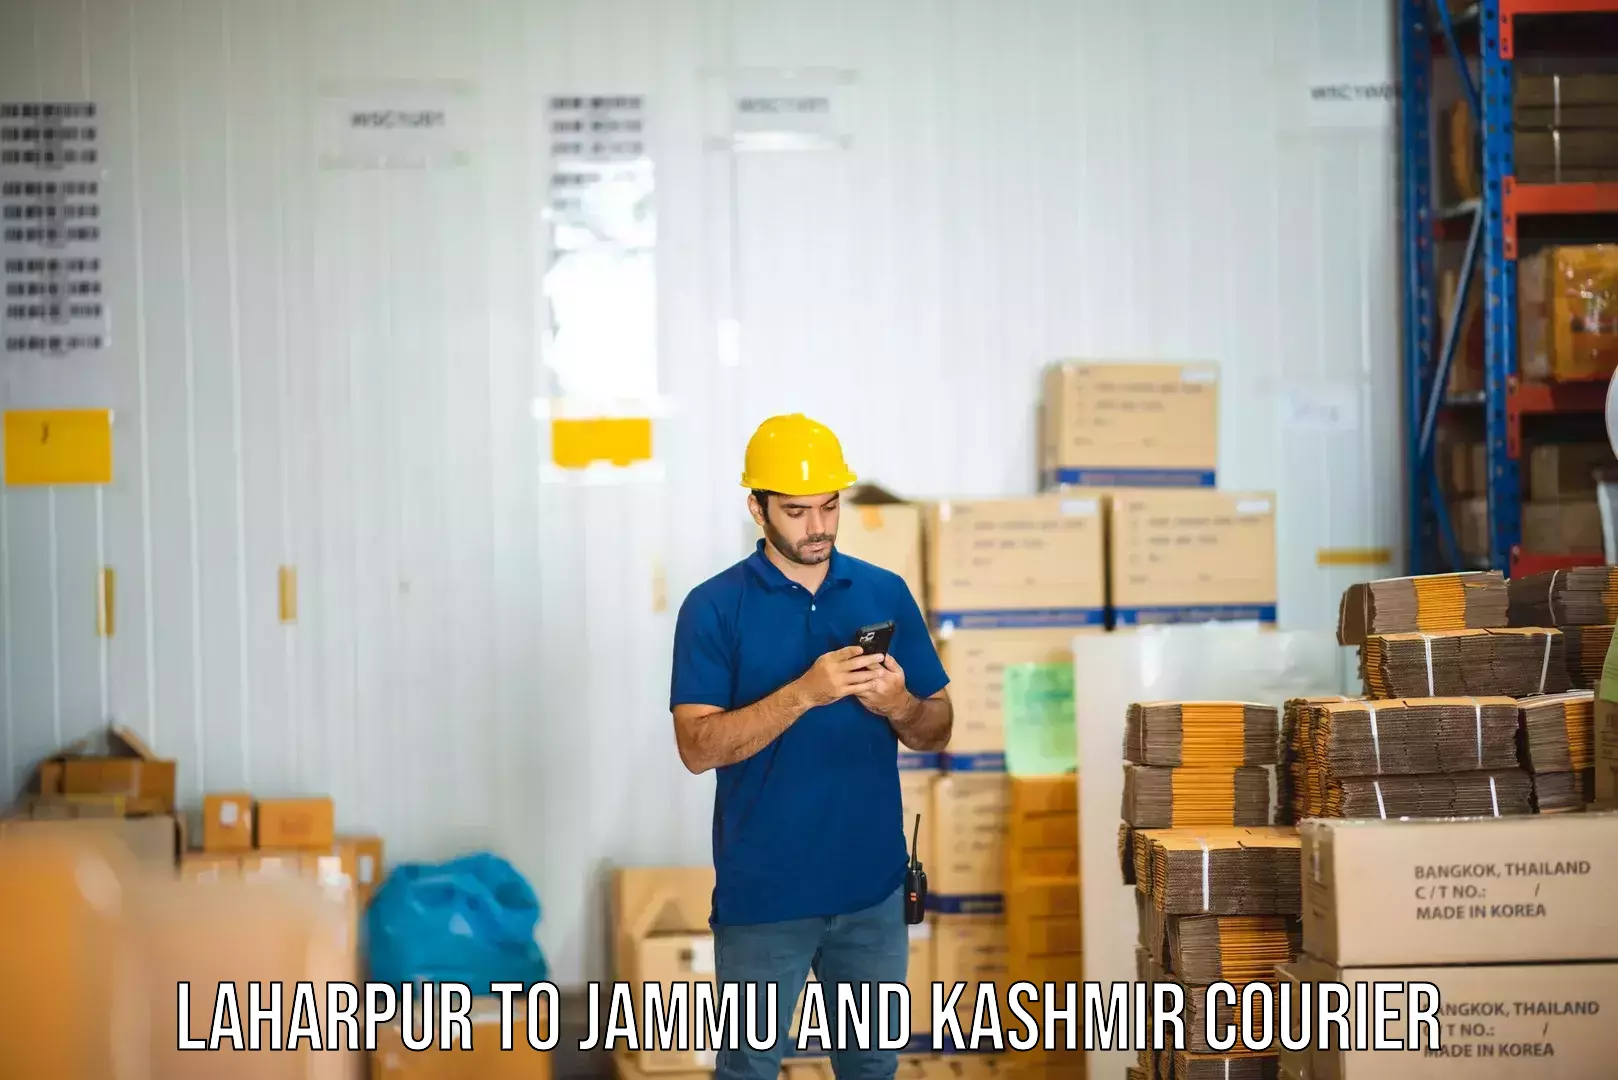 Fast-track shipping solutions in Laharpur to Nagrota